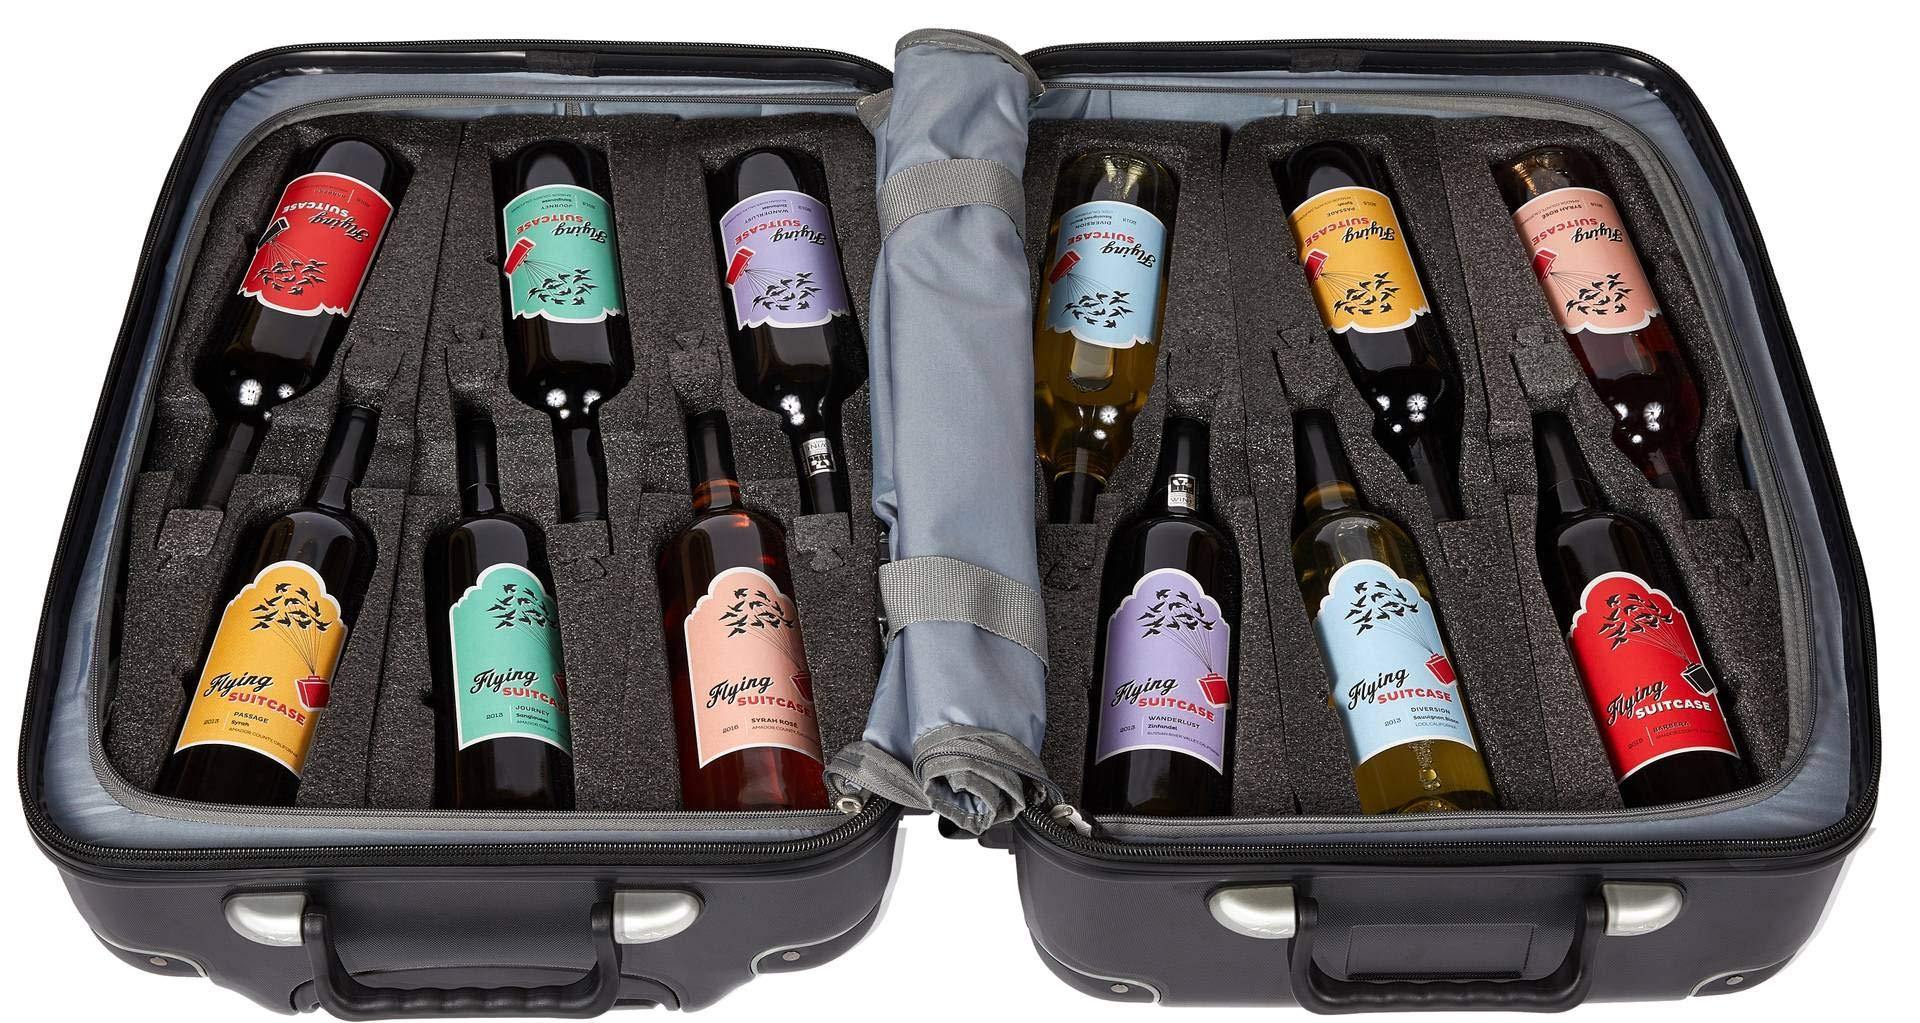 VinGardeValise from FlyWithWine Universal Travel Wine Suitcase,12 Bottle  Grande 05, Airplane Wine Carrier Luggage,10 Year Manufacturer's Warranty